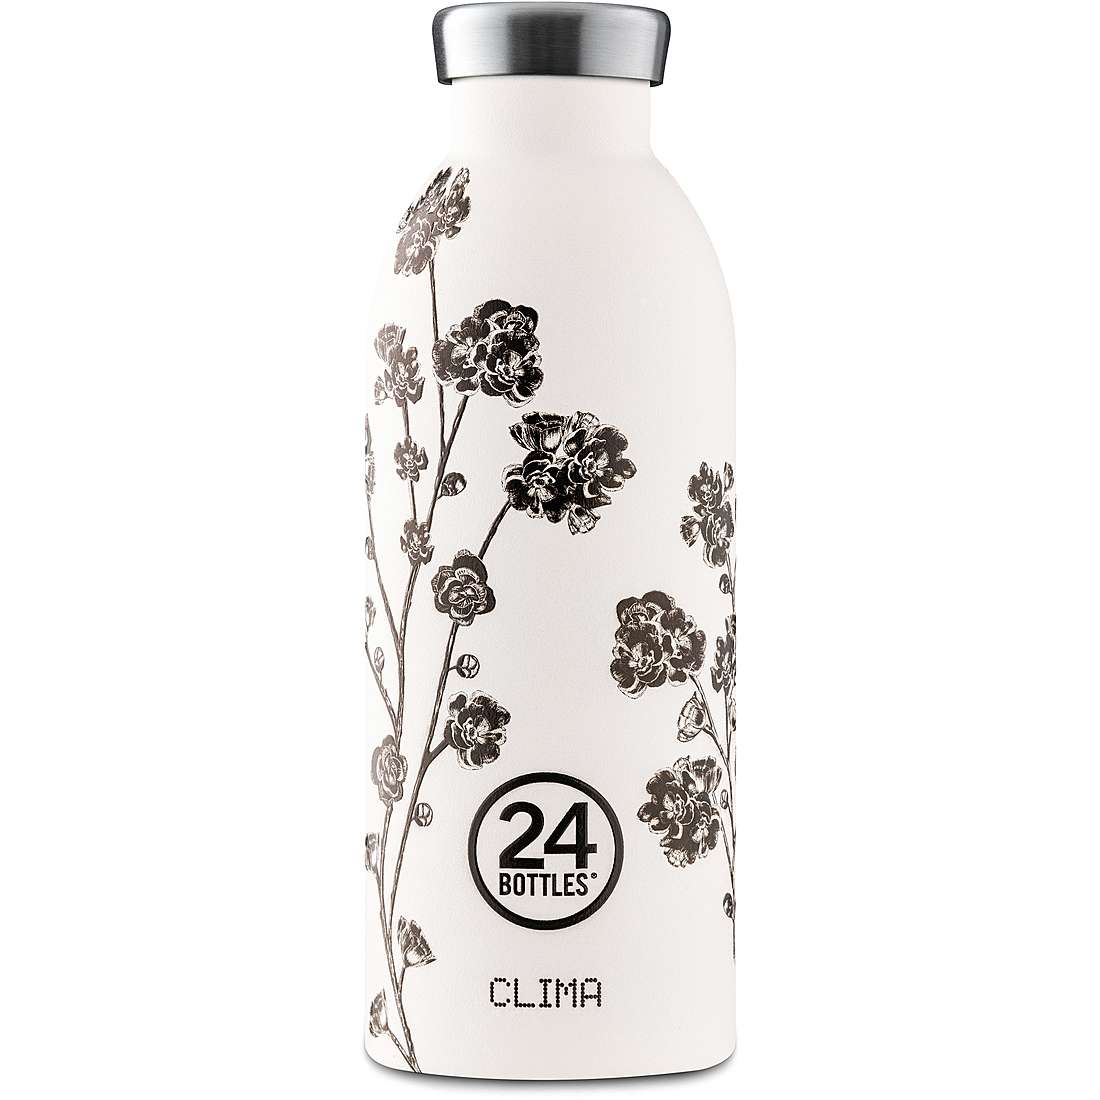 24BOTTLES Clima Double Walled Stainless Steel Water Bottle - 500ml - White Rose